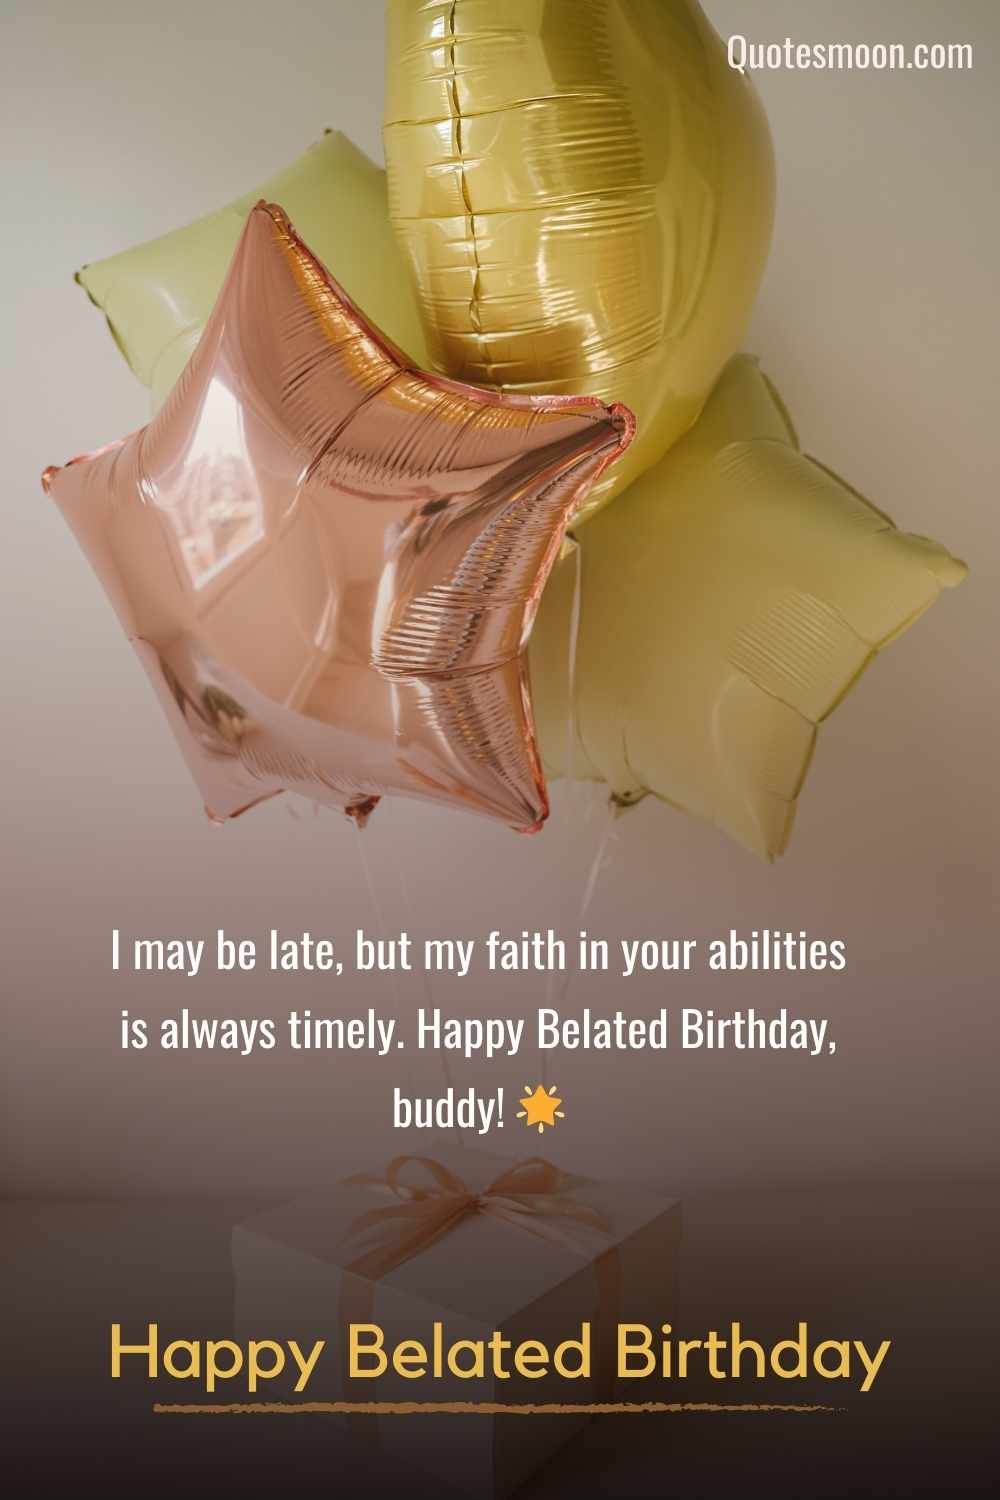 Happy Belated Birthday Wishes quotes With Photo